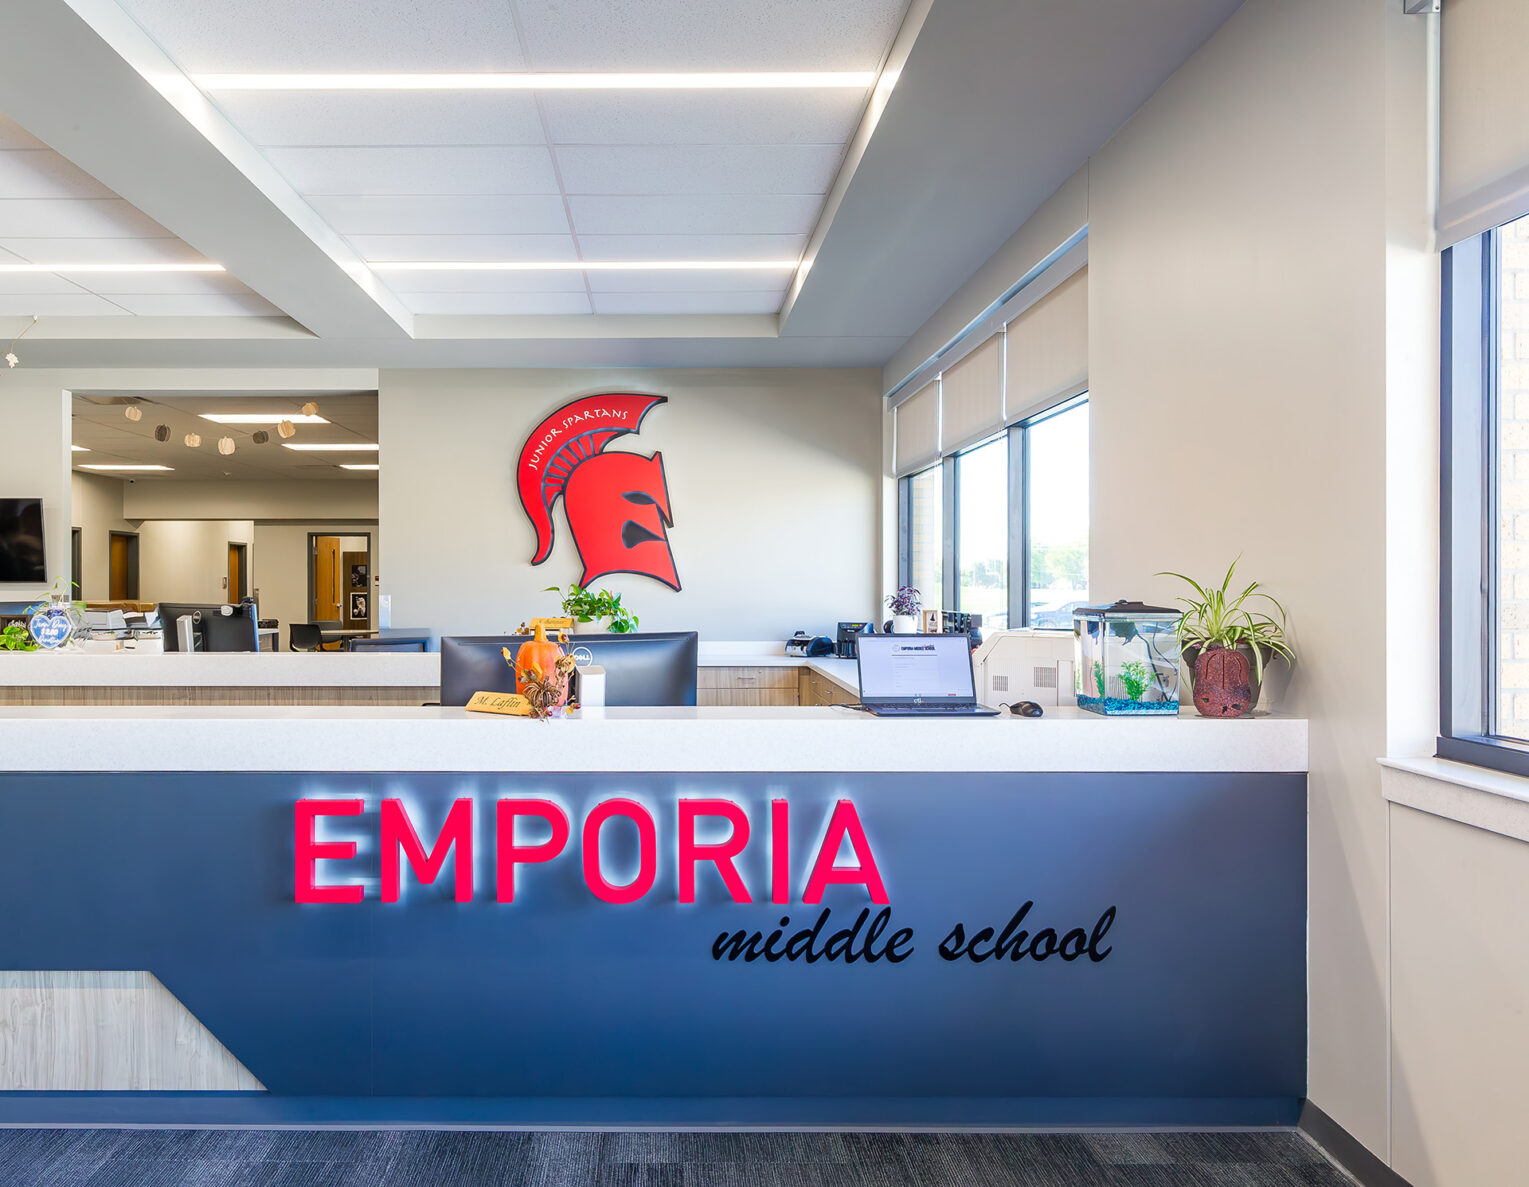 Interior shot of Emporia Middle School renovated by McCownGordon.